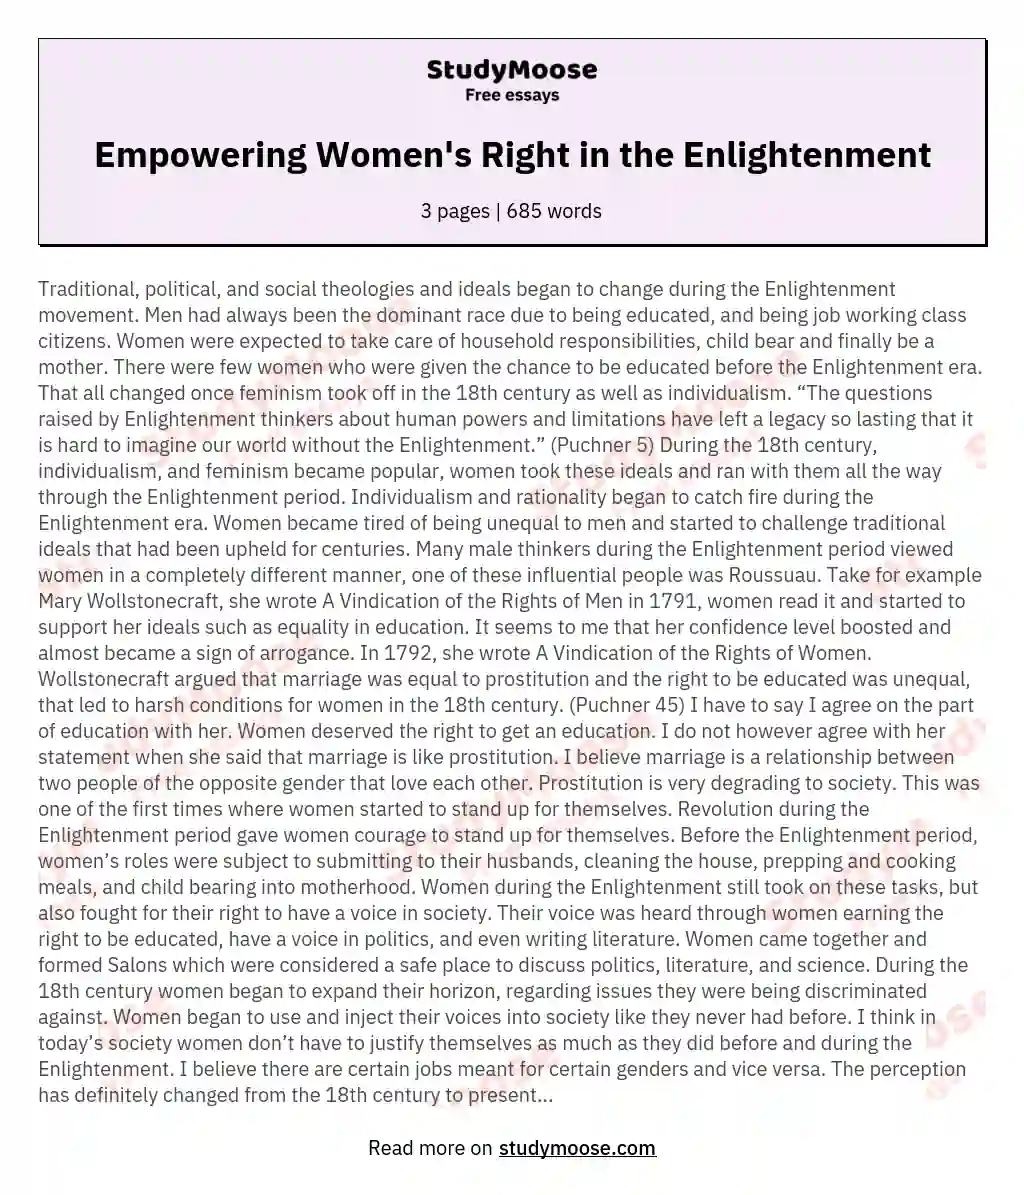 Empowering Women's Right in the Enlightenment essay